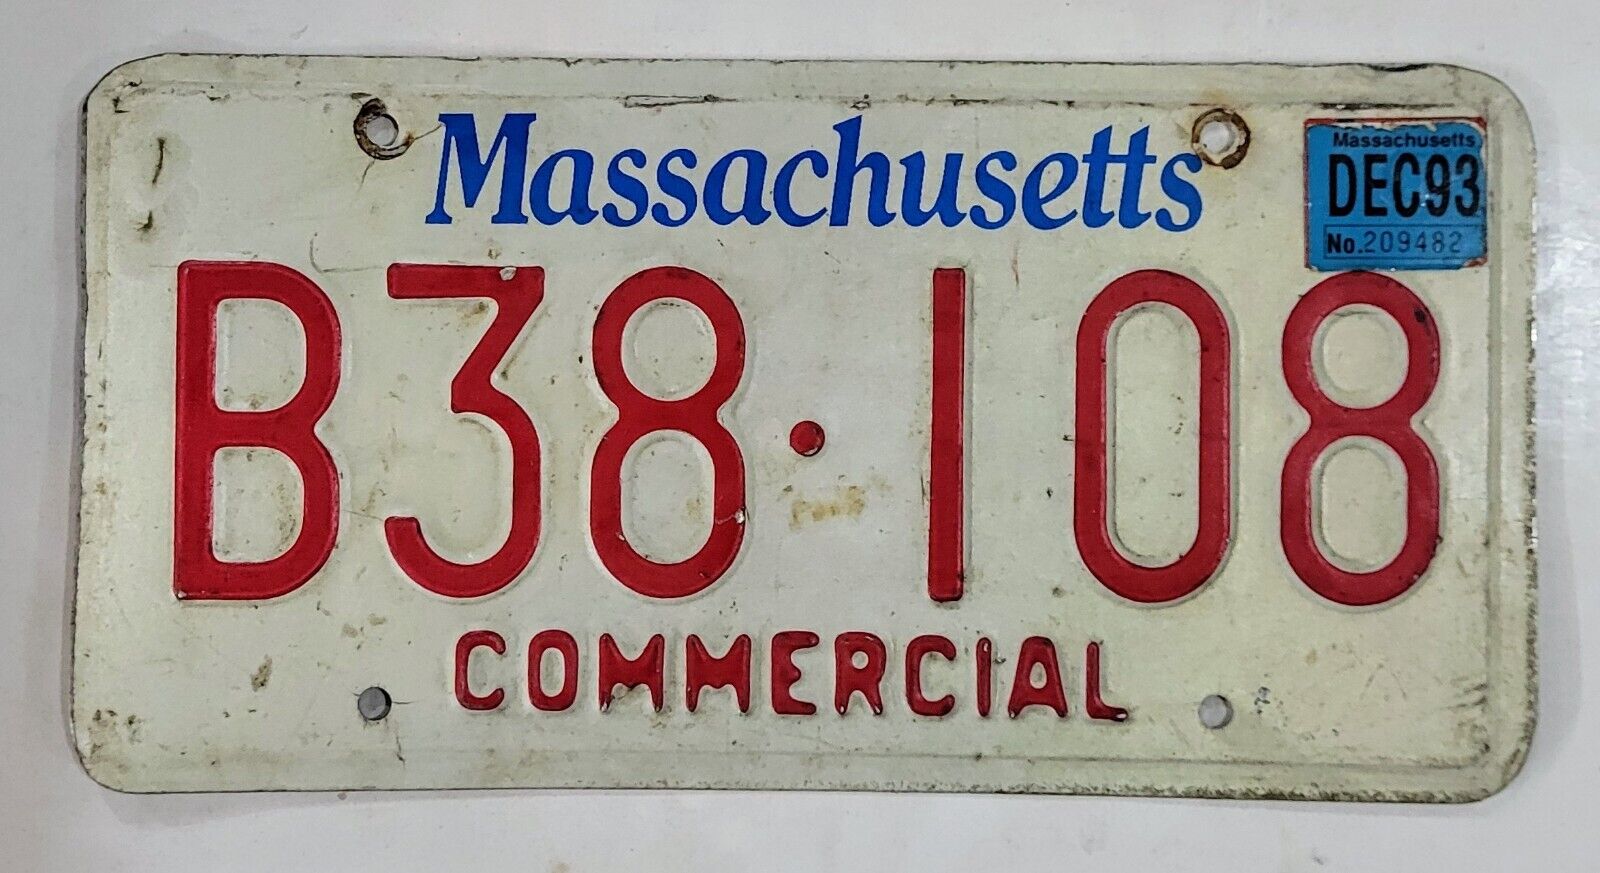 MASSACHUSETTS  License Plate 🔥FREE SHIPPING🔥 B38 108 ~ 1993 VINTAGE COMMERCIAL